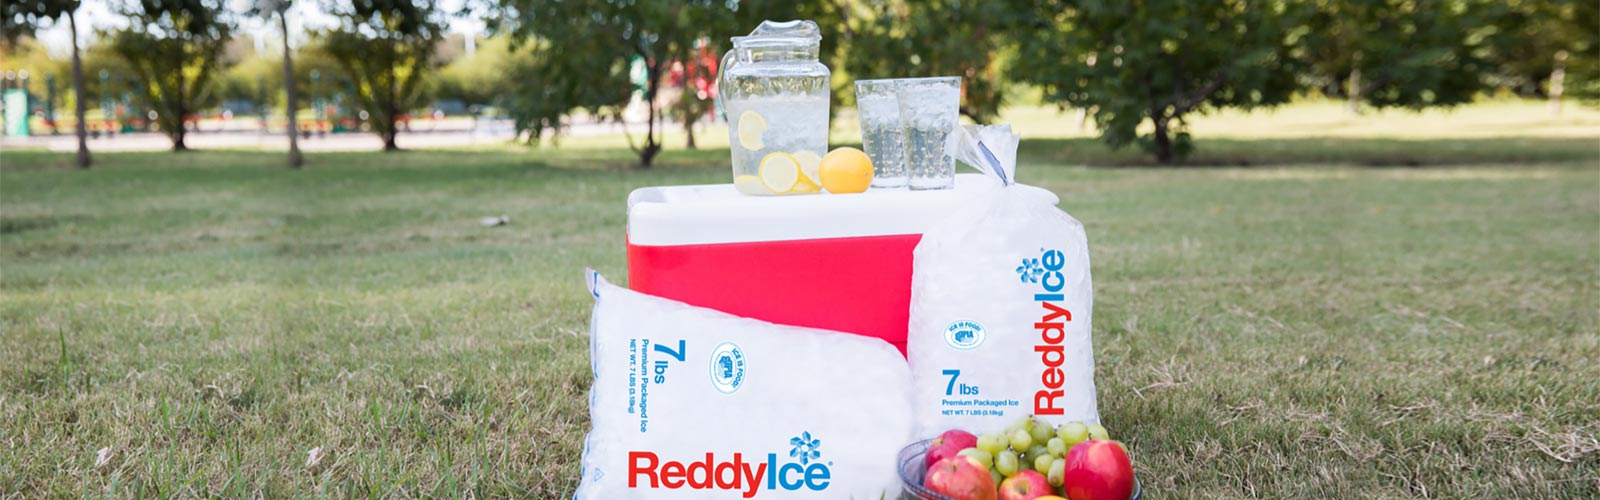 Reddy Ice with Freezer for Outdoor Event